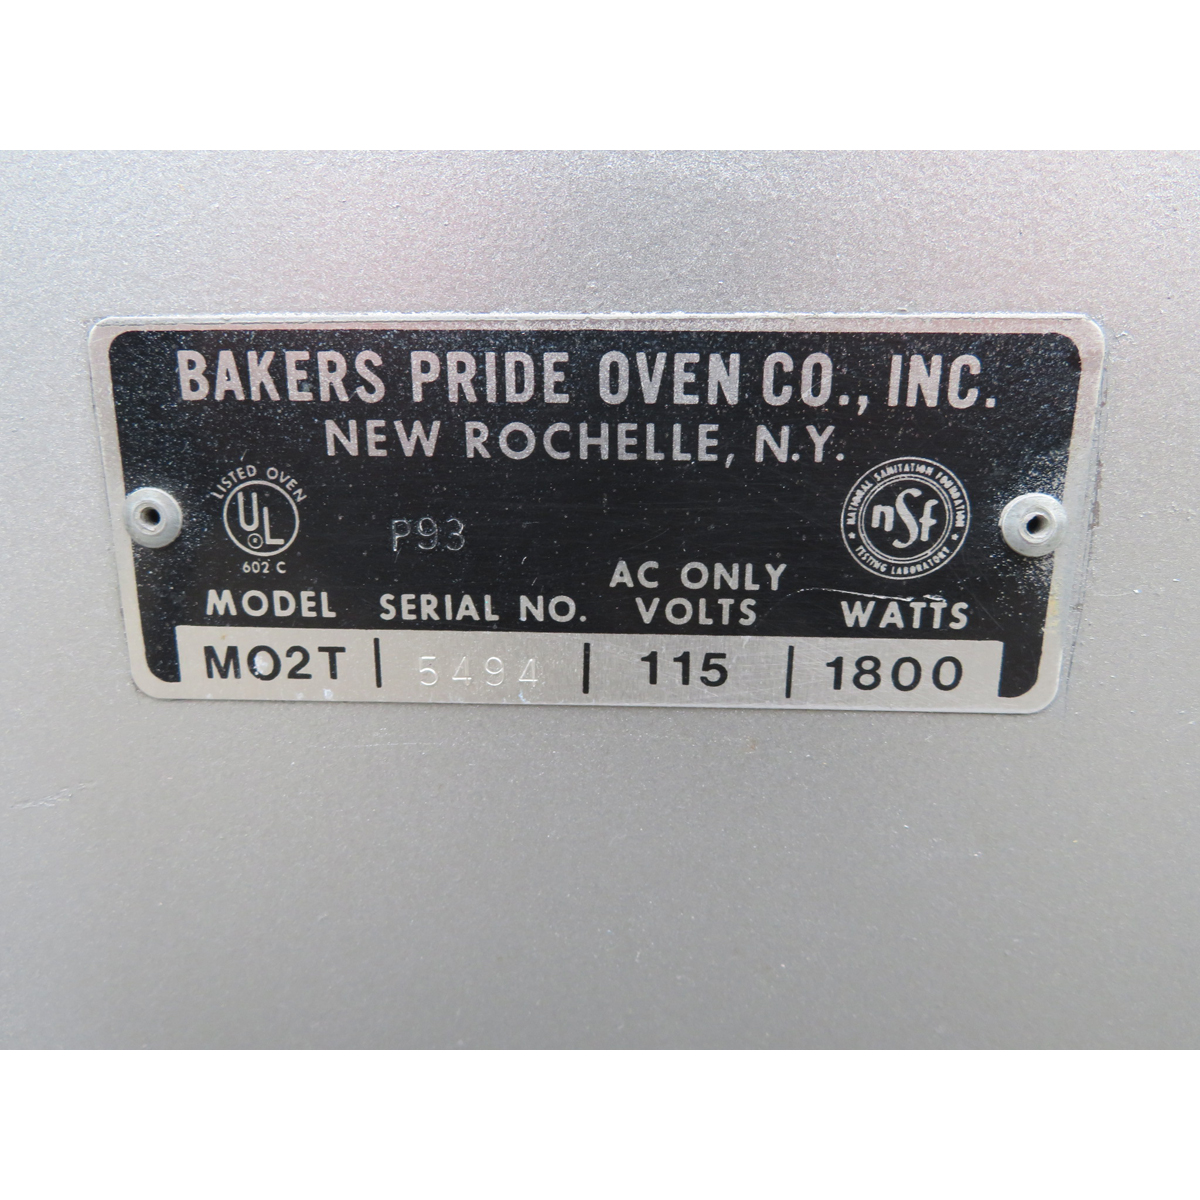 Bakers Pride MO2T Countertop Pizza Oven, Used Great Condition image 2